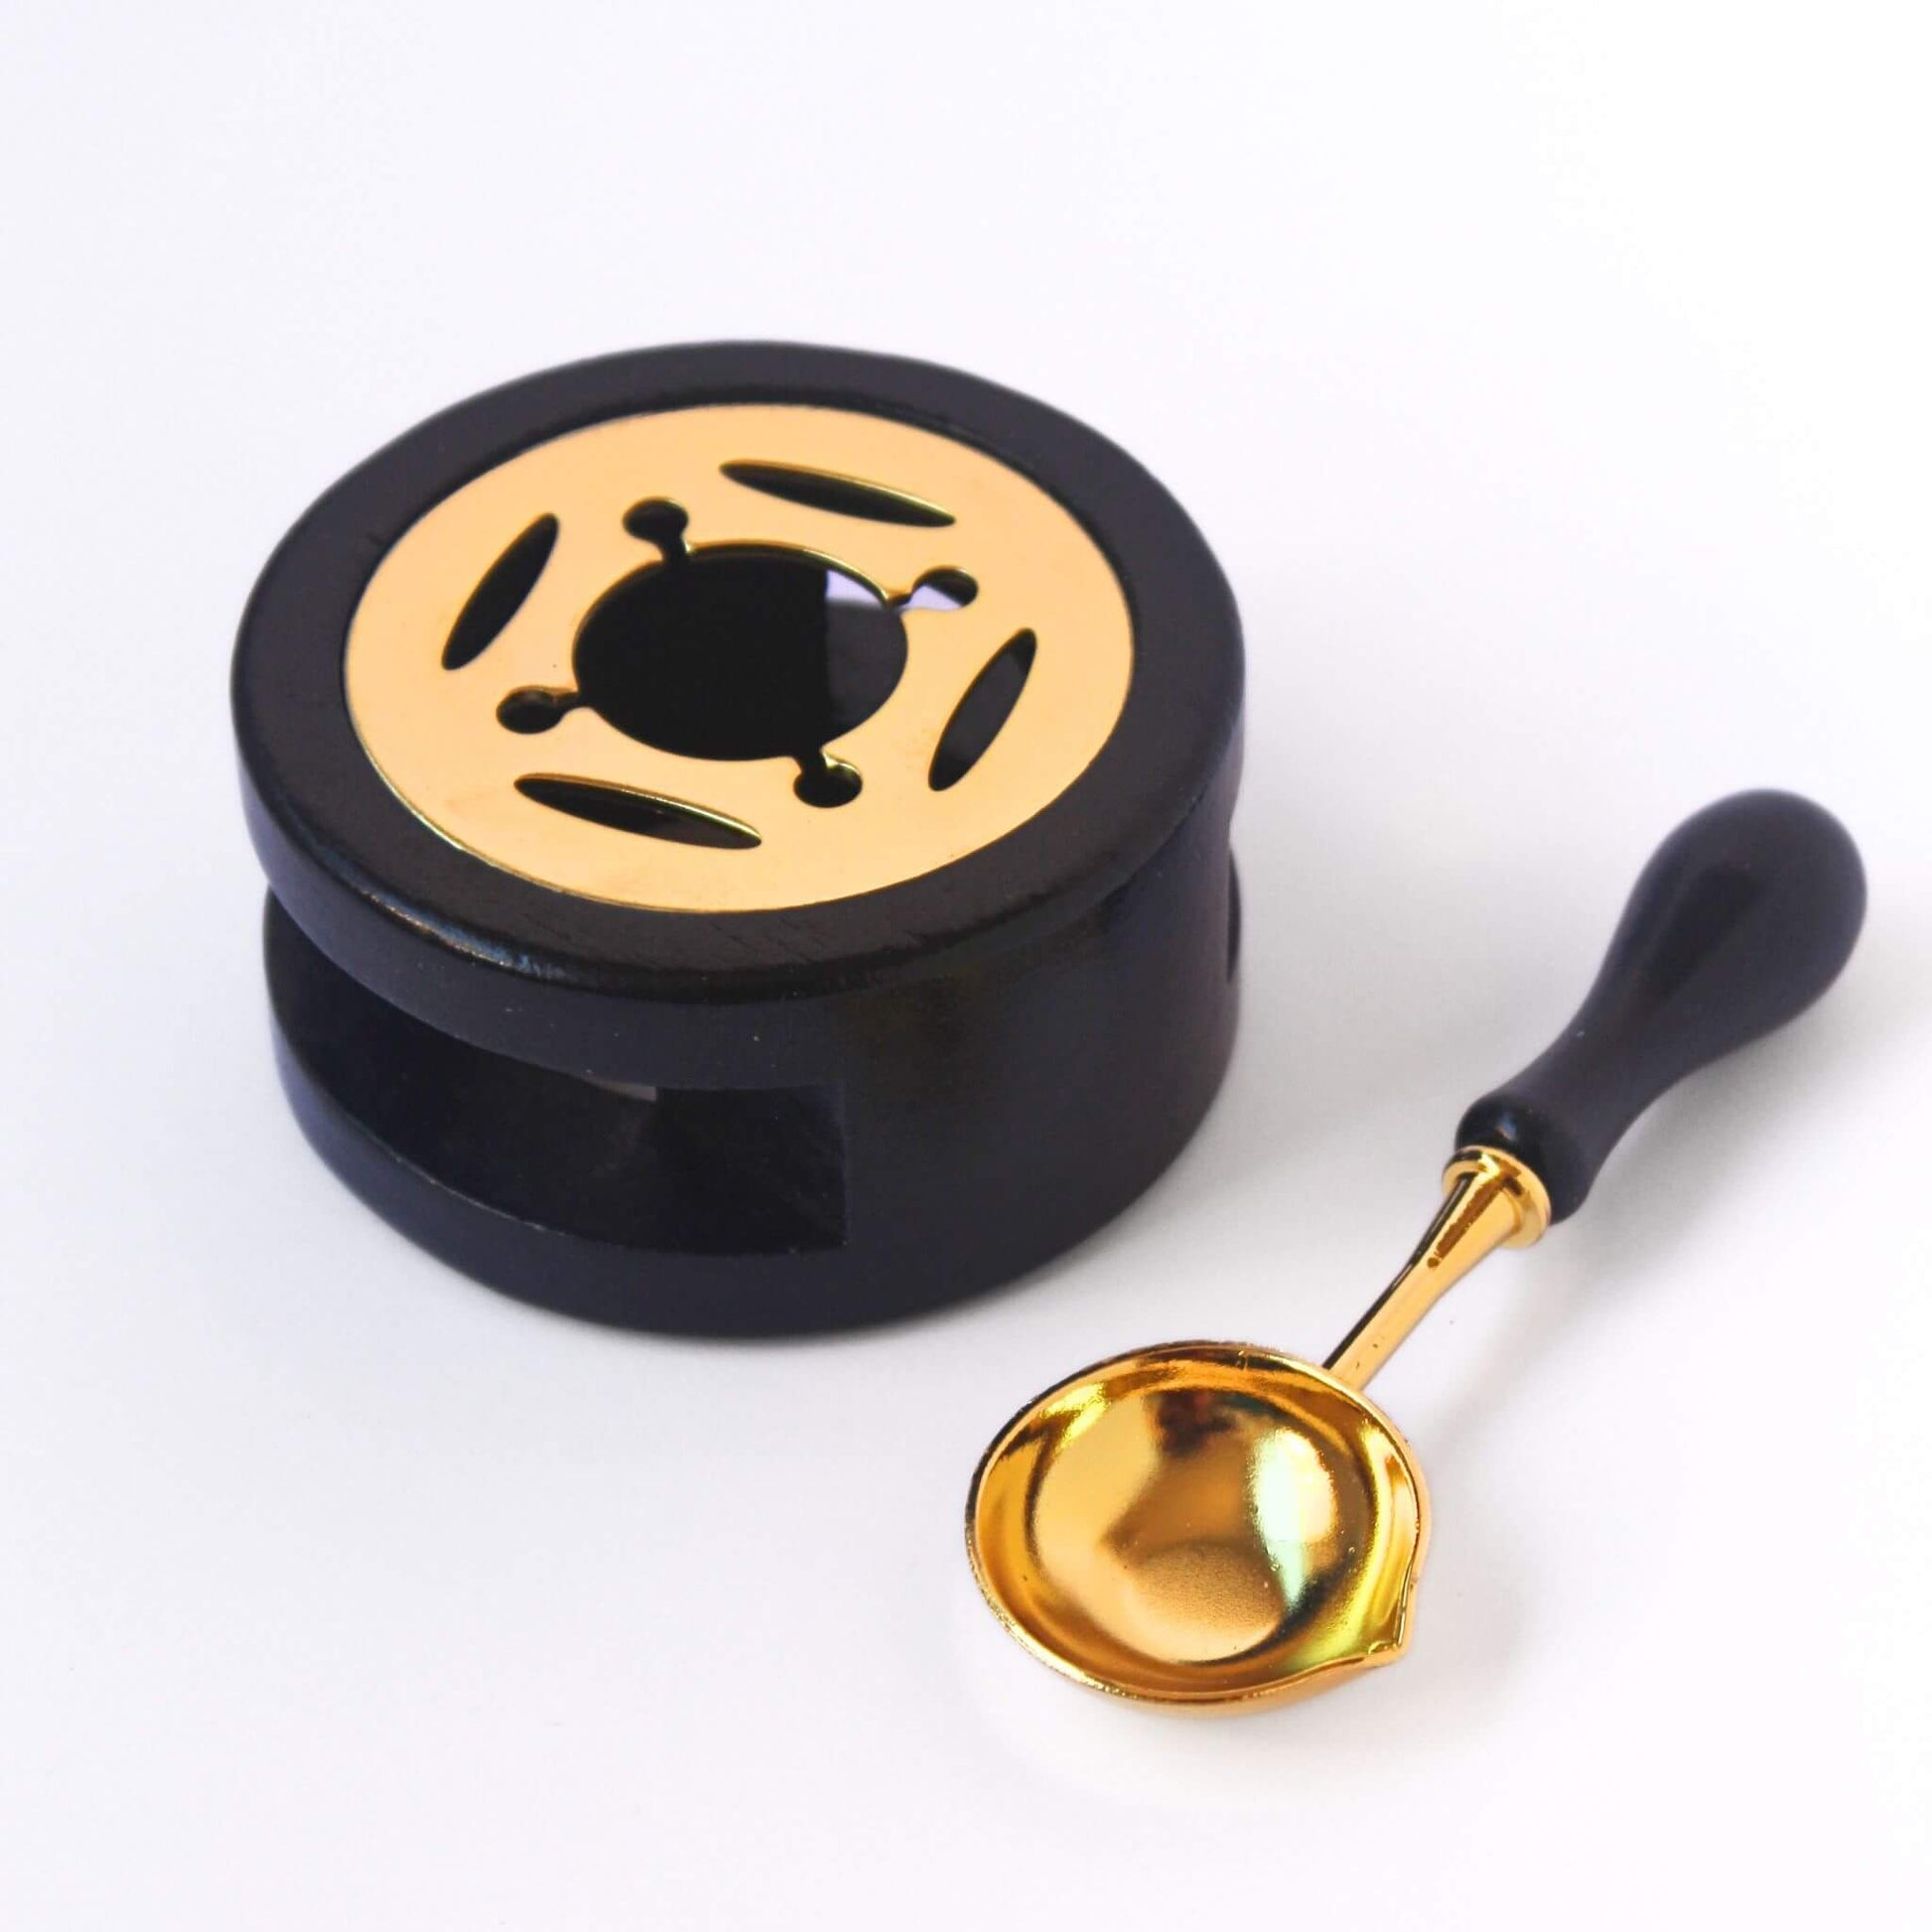 Black wax melting furnace with gold detail and matching black and gold wax melting spoon beside it